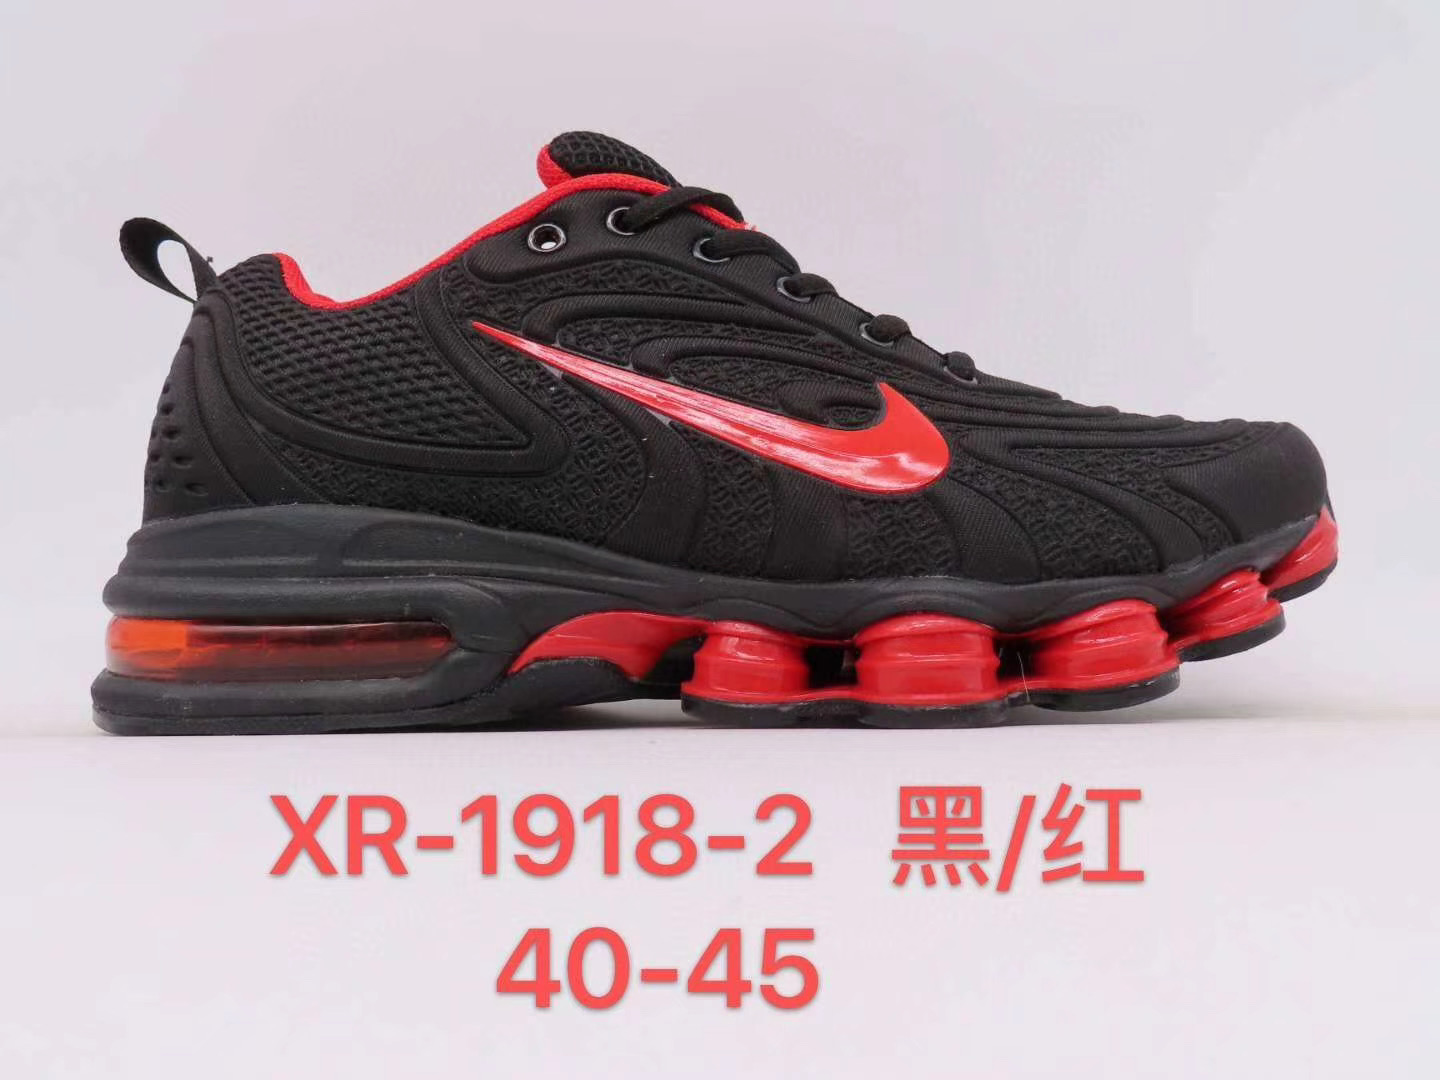 Nike Air Max 2019.6 Voyager Black Red Shoes